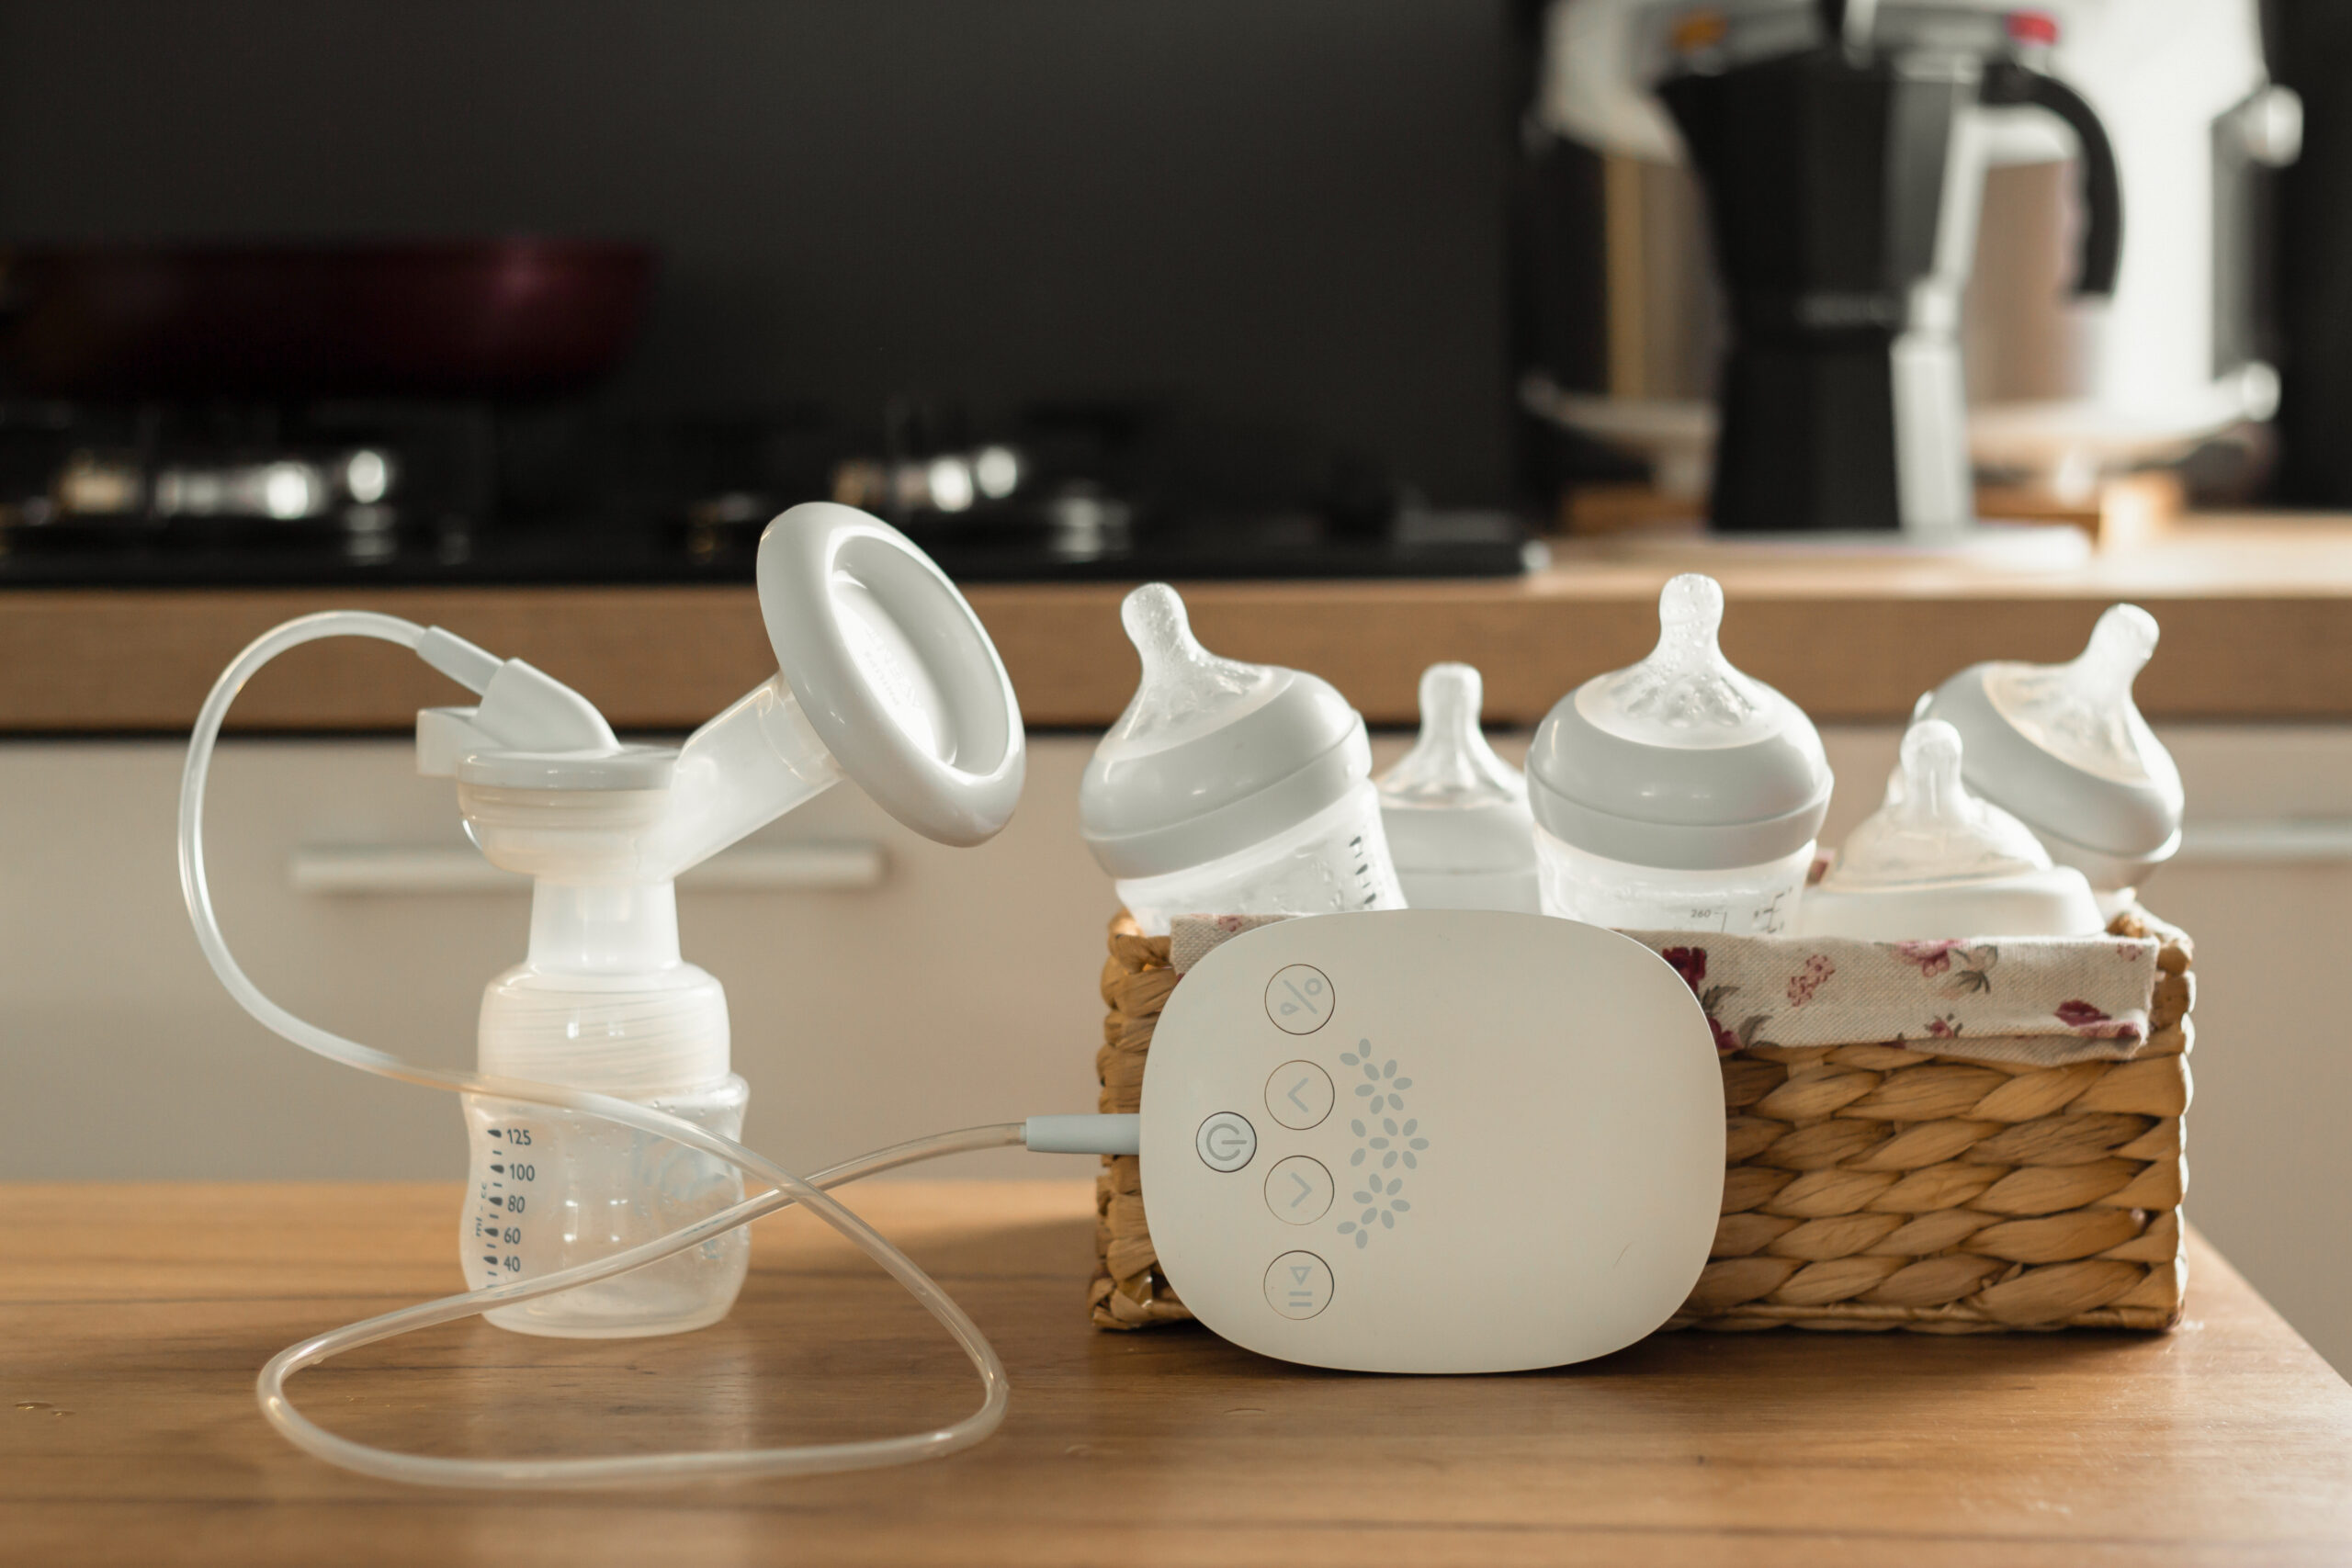 Electric breast pump and bottles for breasting milk in a wicker basket on a wooden table